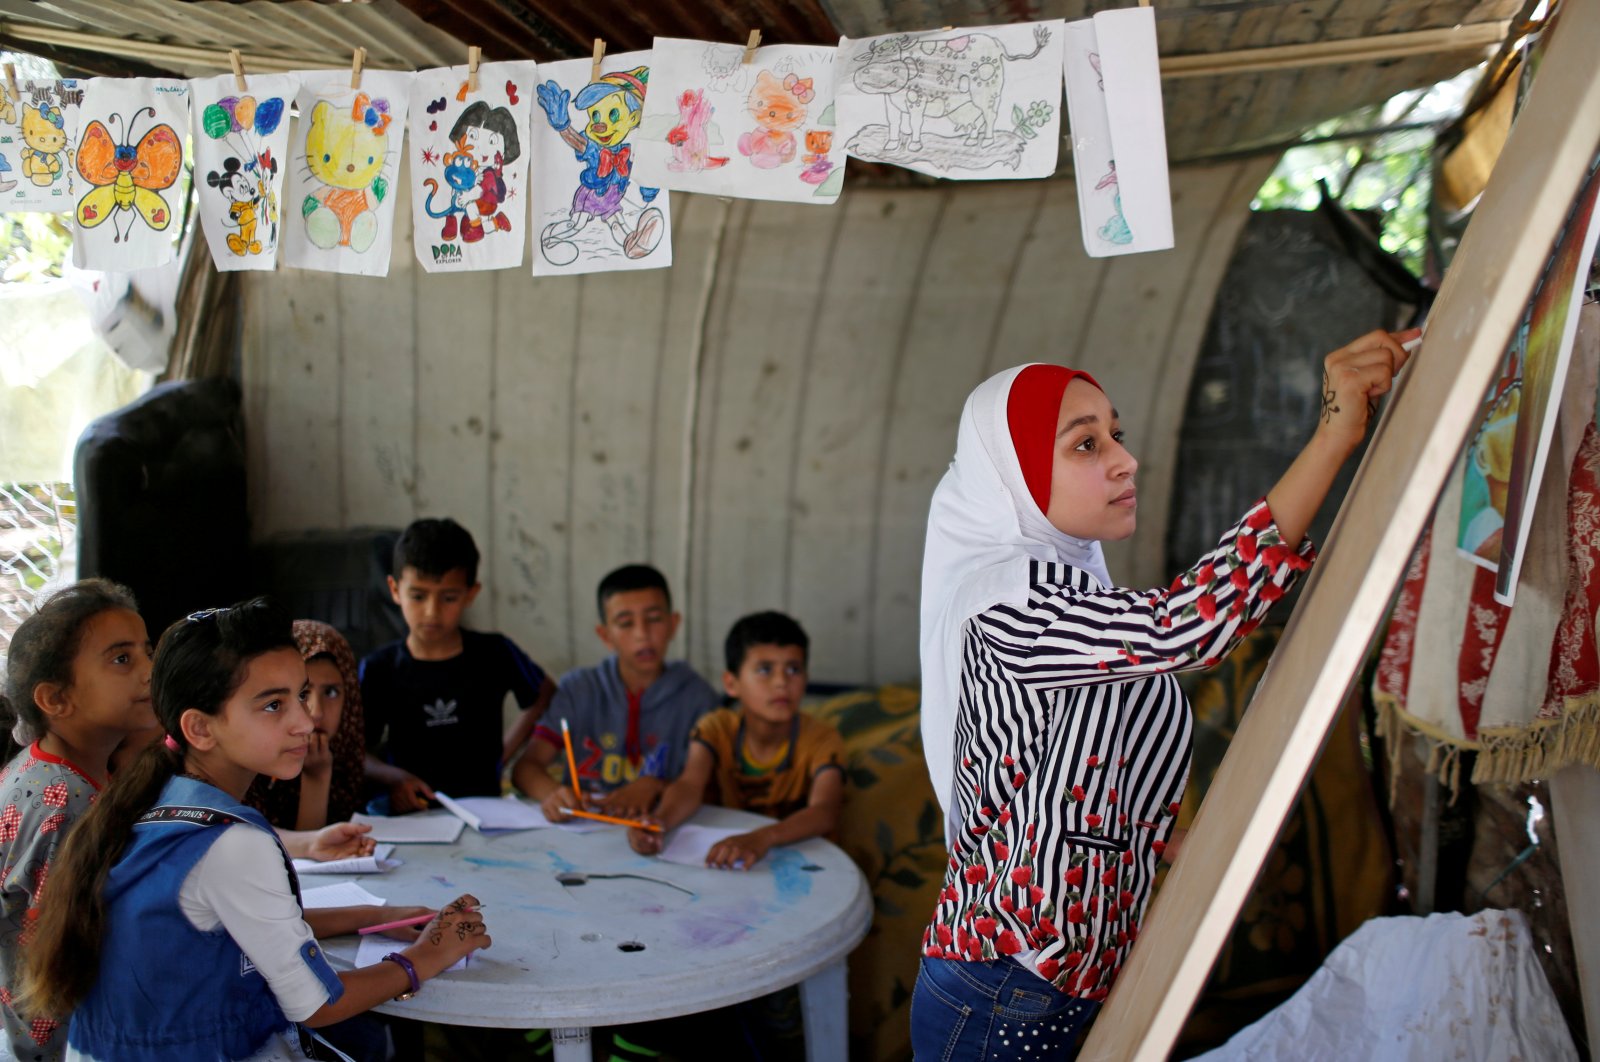 A Palestinian schoolgirl Fajr Hmaid, 13, holds Arabic language lessons for her neighbors' children as schools are shut due to the coronavirus restrictions, at her family house, Gaza, May 19, 2020.